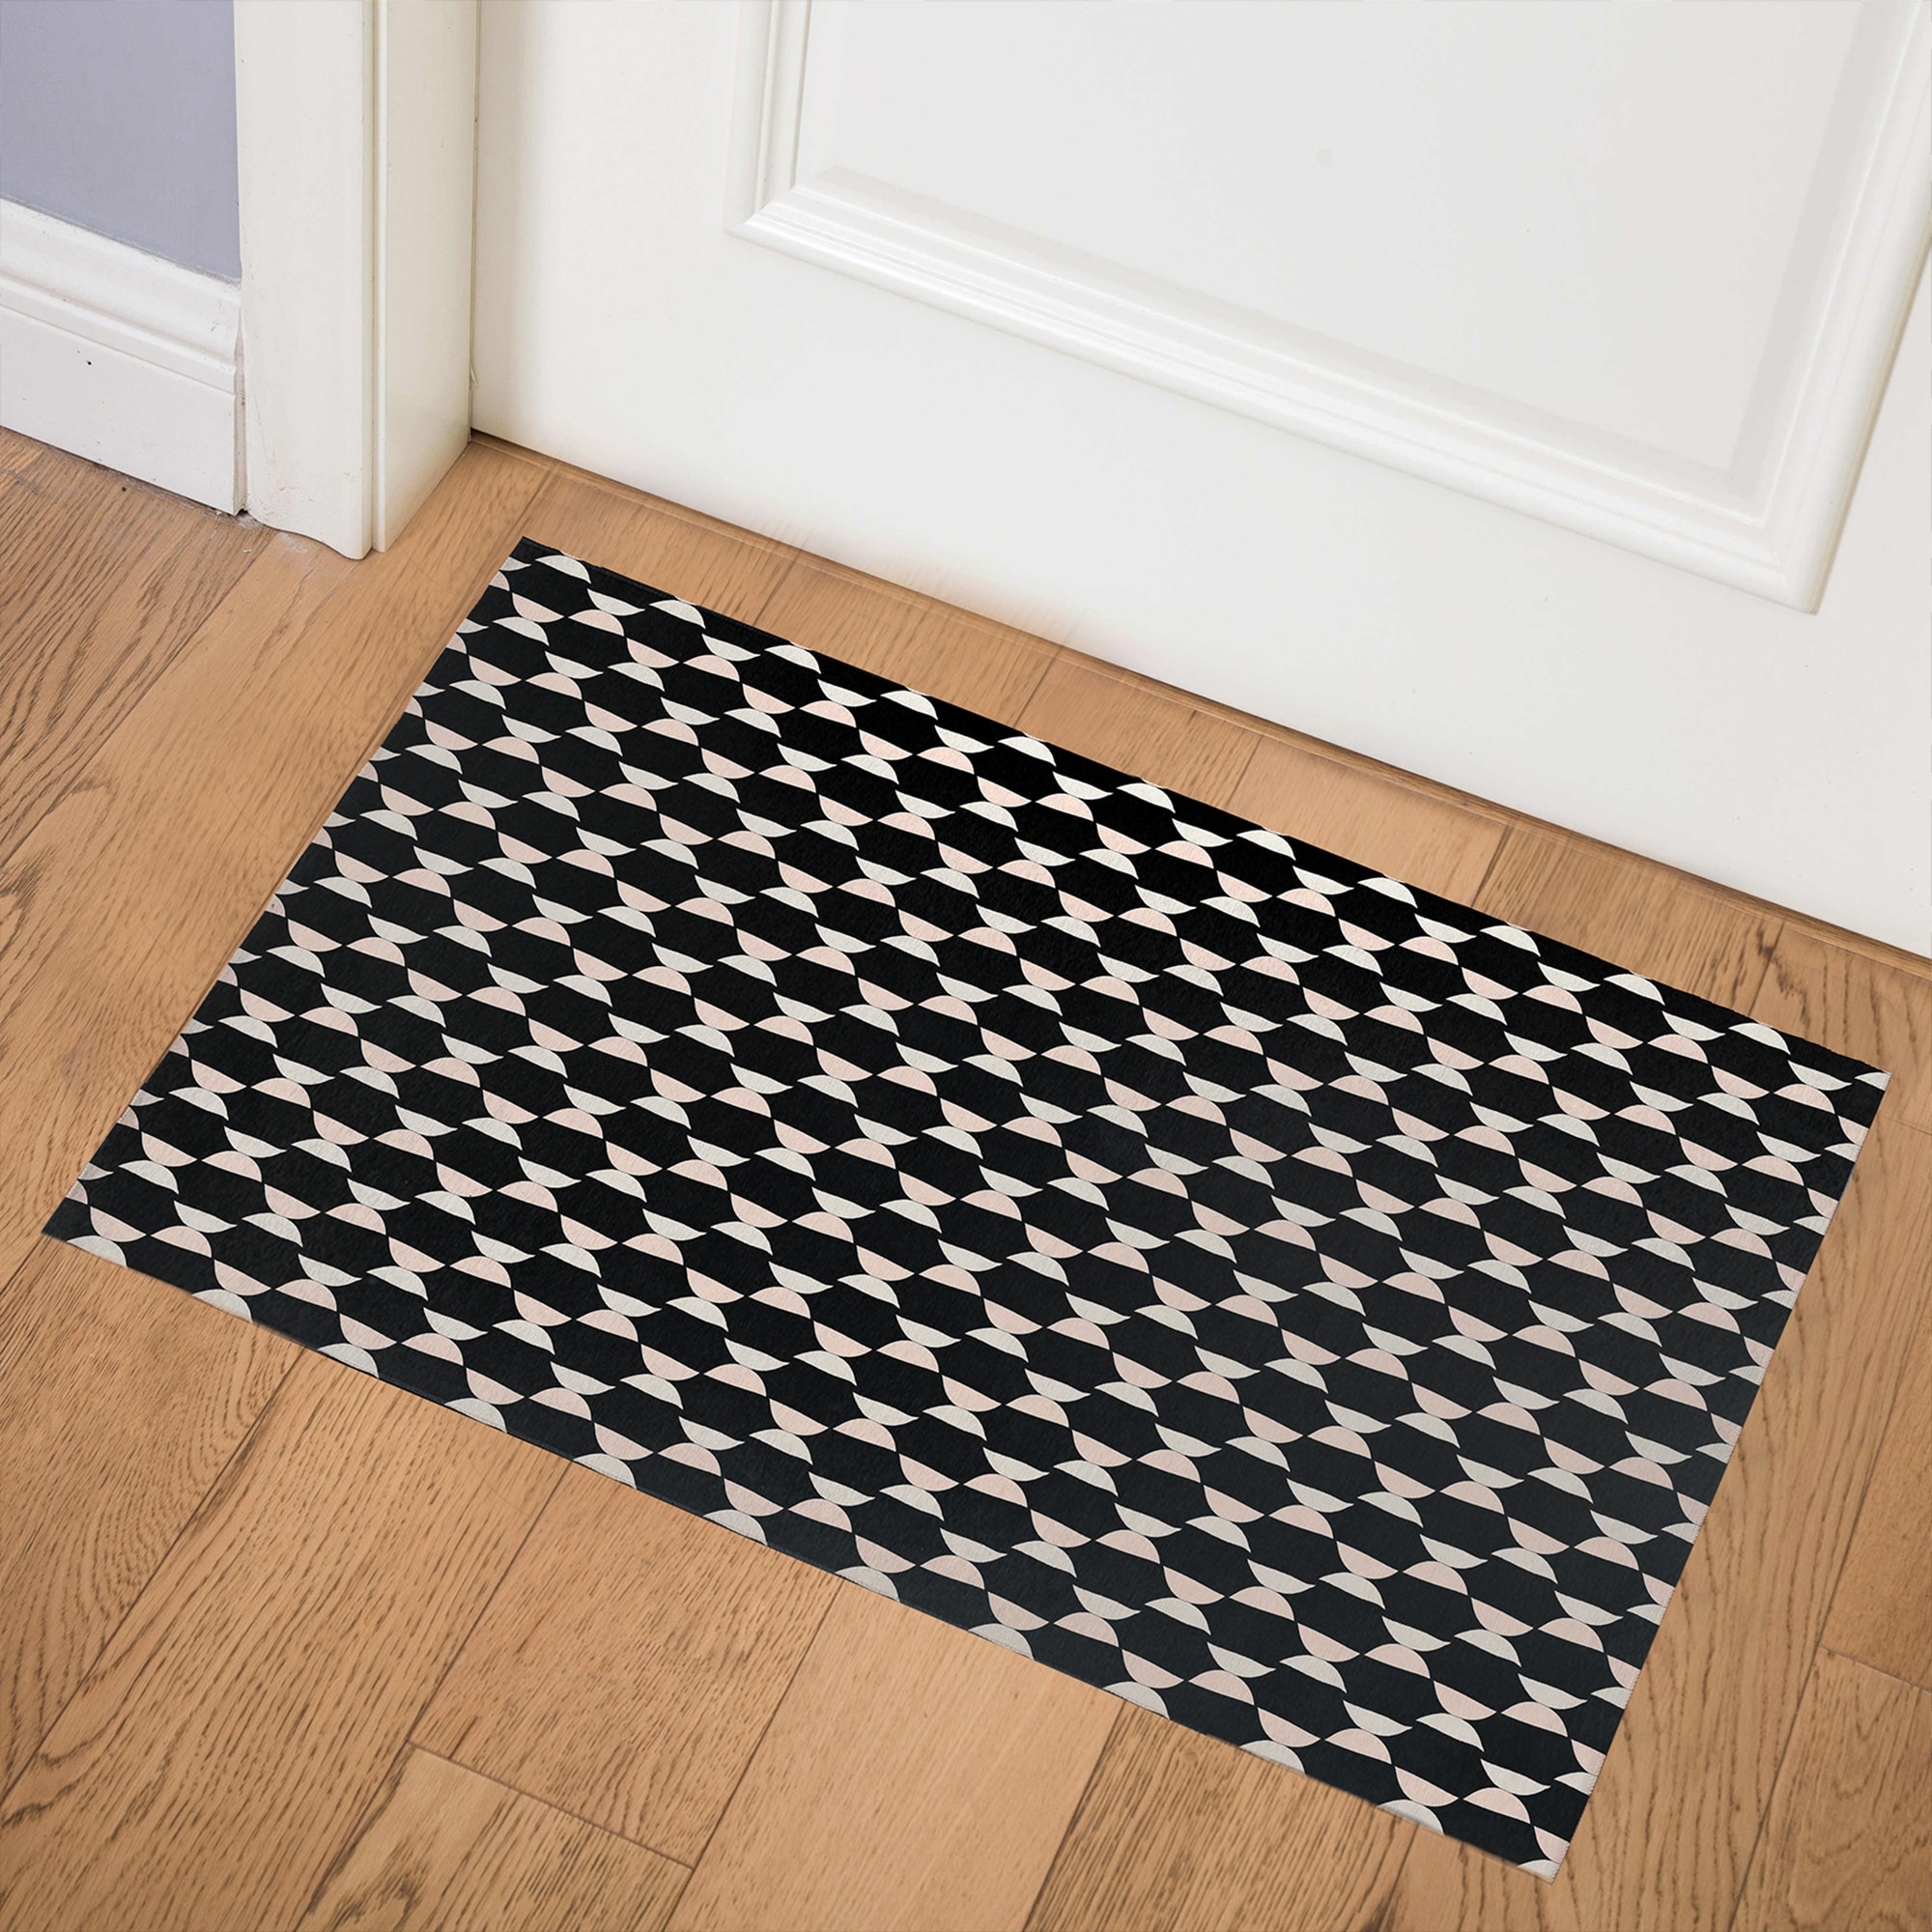 https://ak1.ostkcdn.com/images/products/is/images/direct/f730f7ad27eee885479be7180b703592efaf889a/HALF-MOON-BLACK-Indoor-Floor-Mat-By-Kavka-Designs.jpg